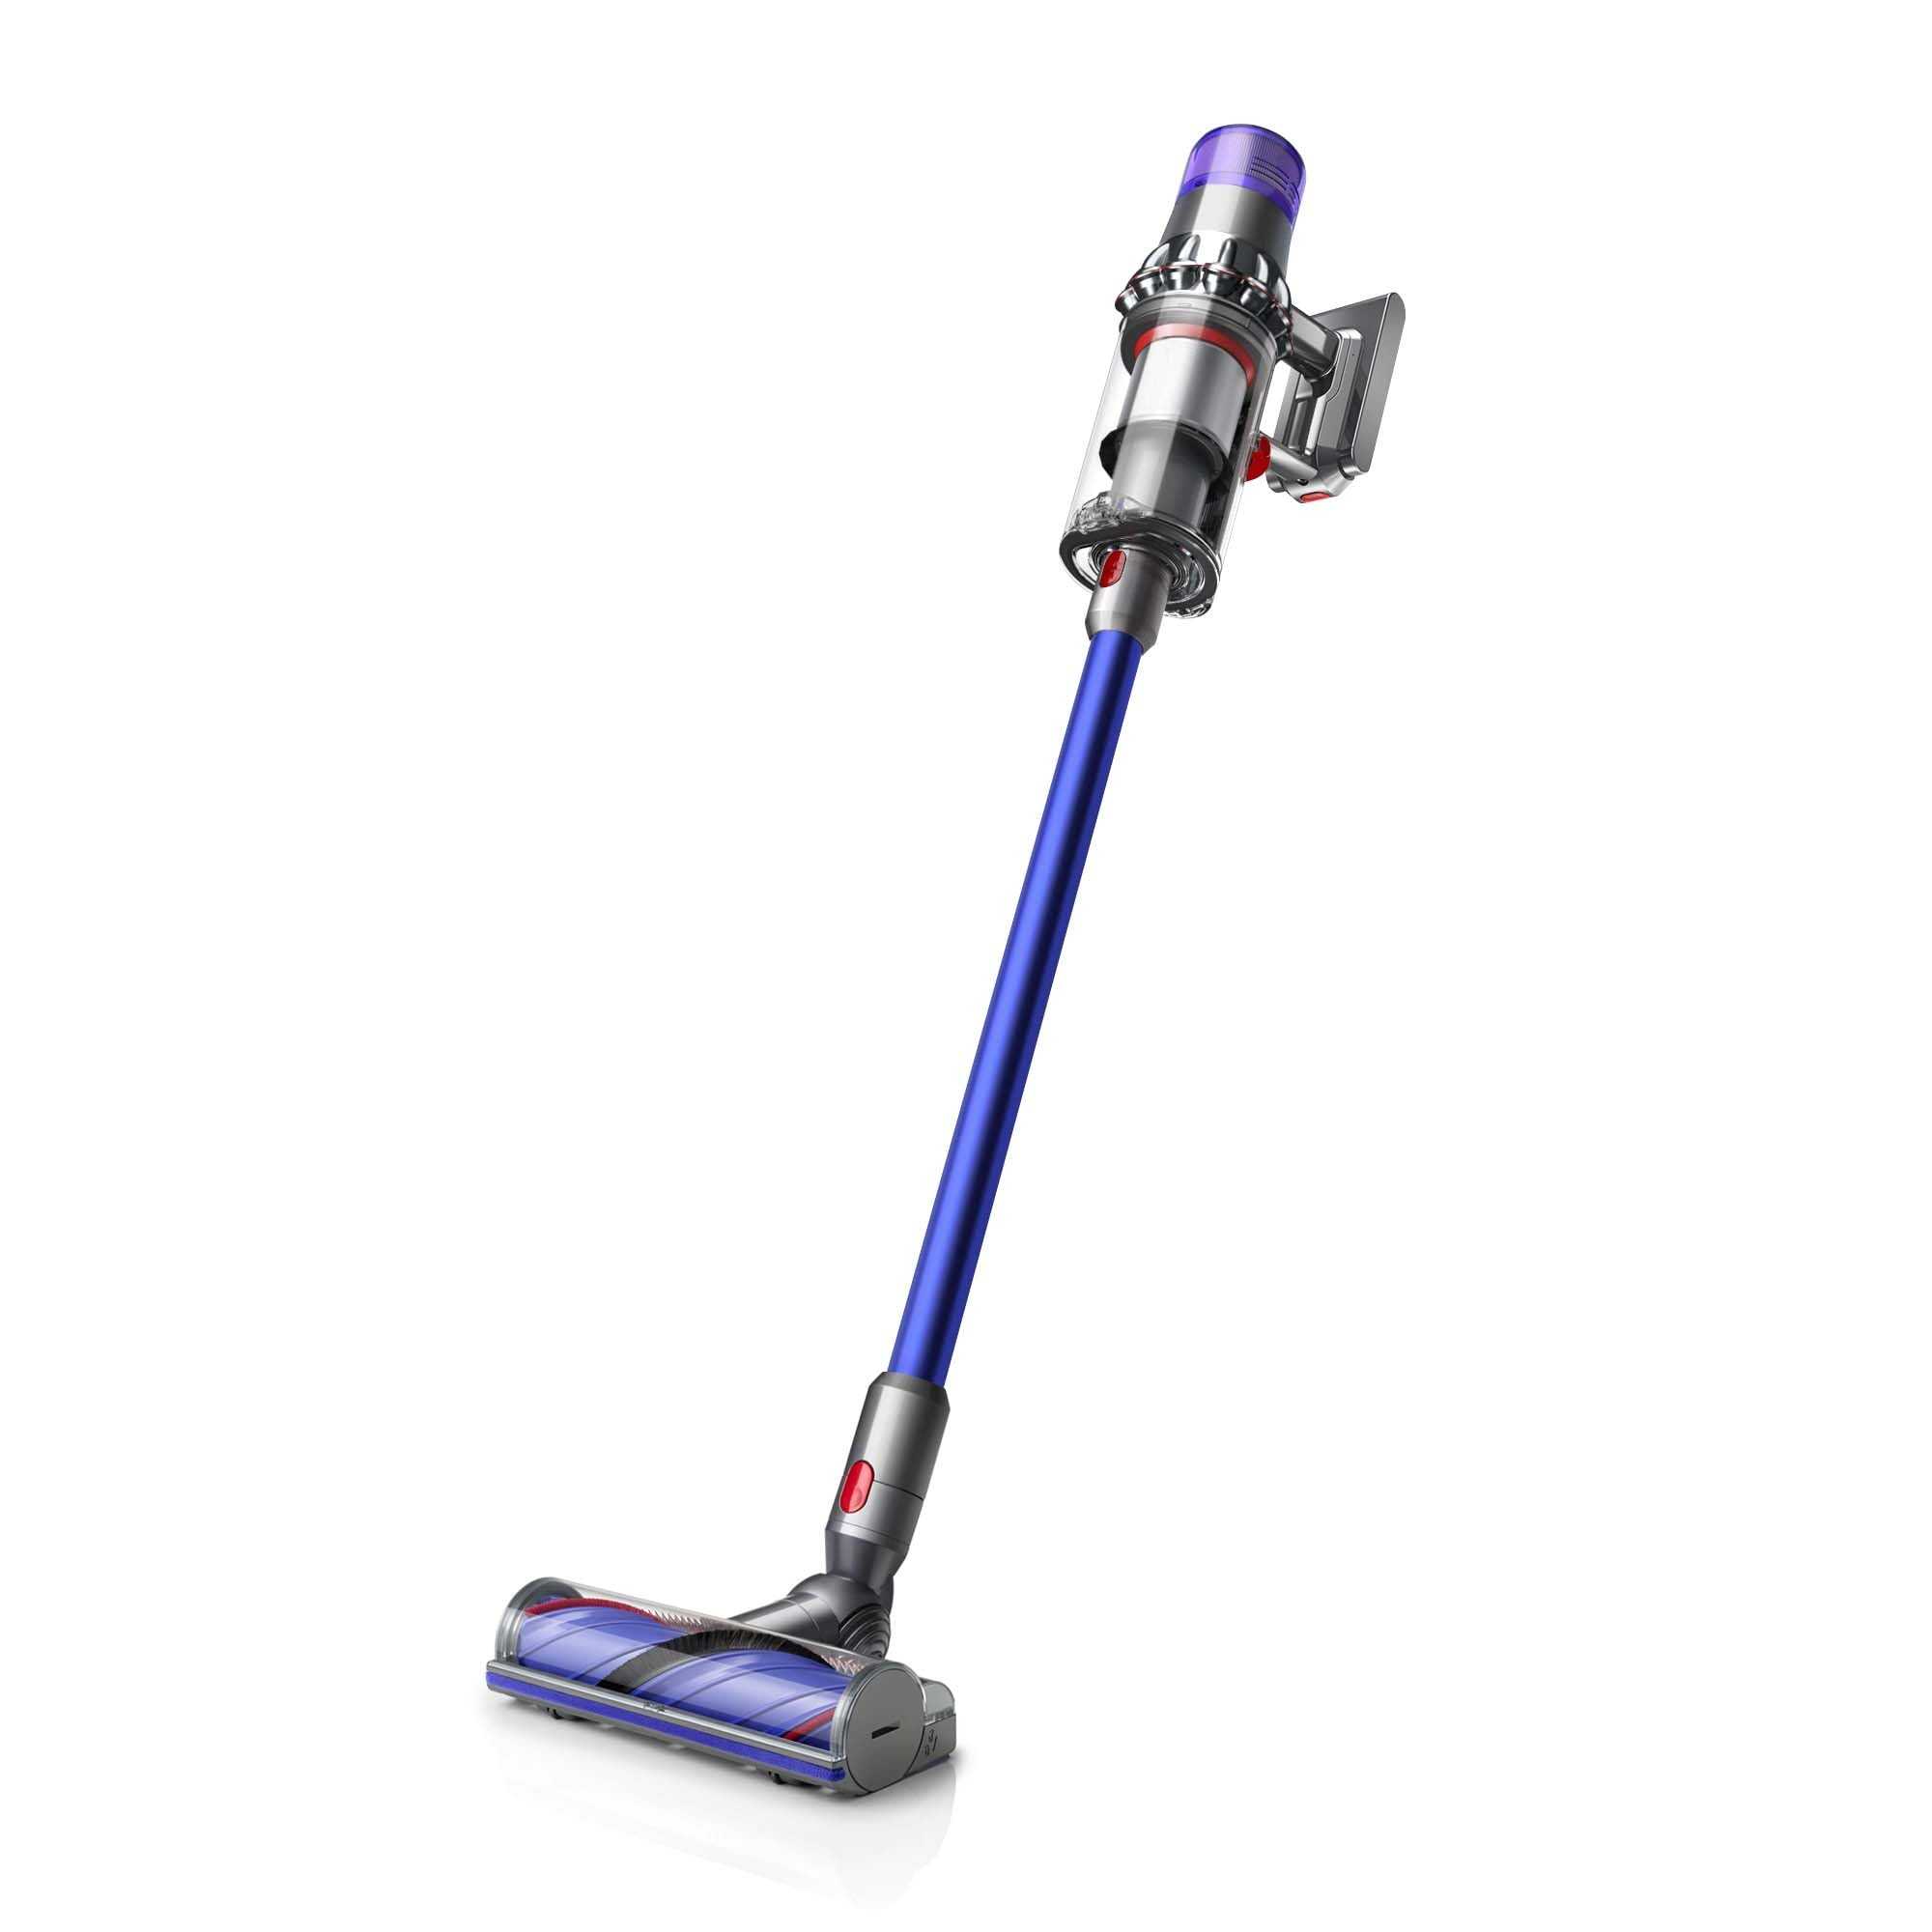 Dreame Launches Powerful R Series Stick Vacuums - Starting from $299.99